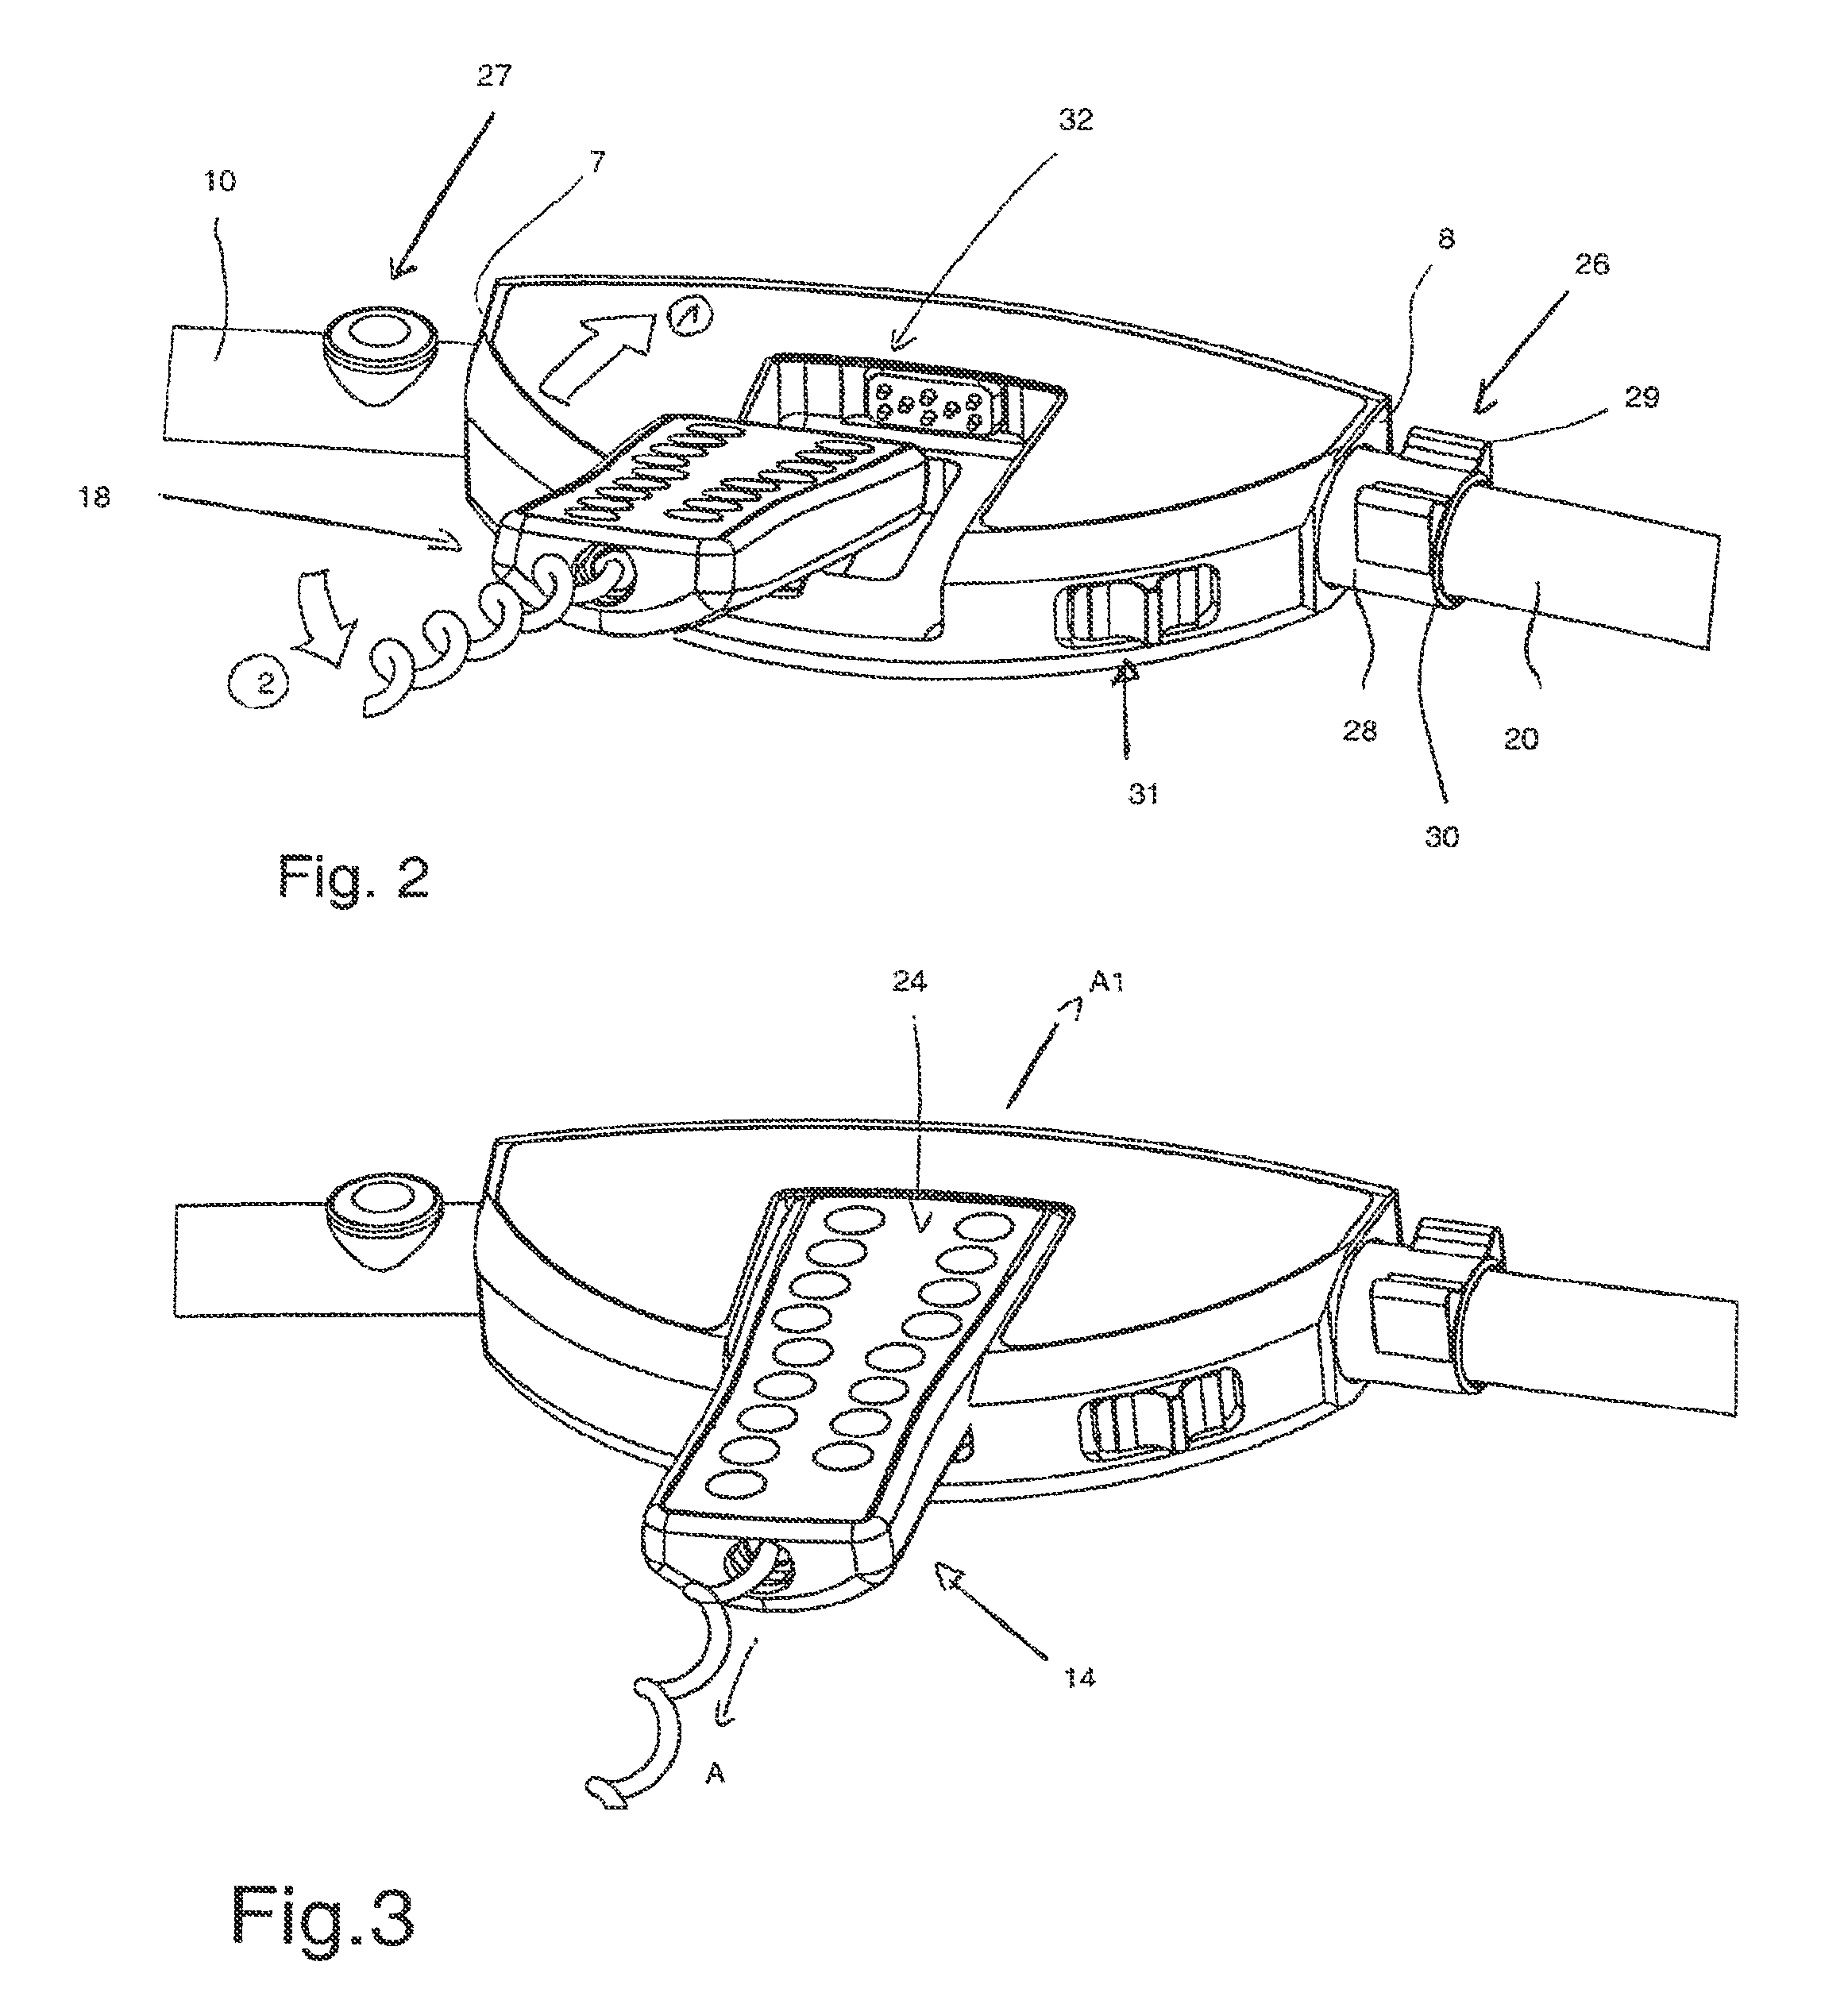 Guide device for a motorized table comprising a unit that groups the table controls together